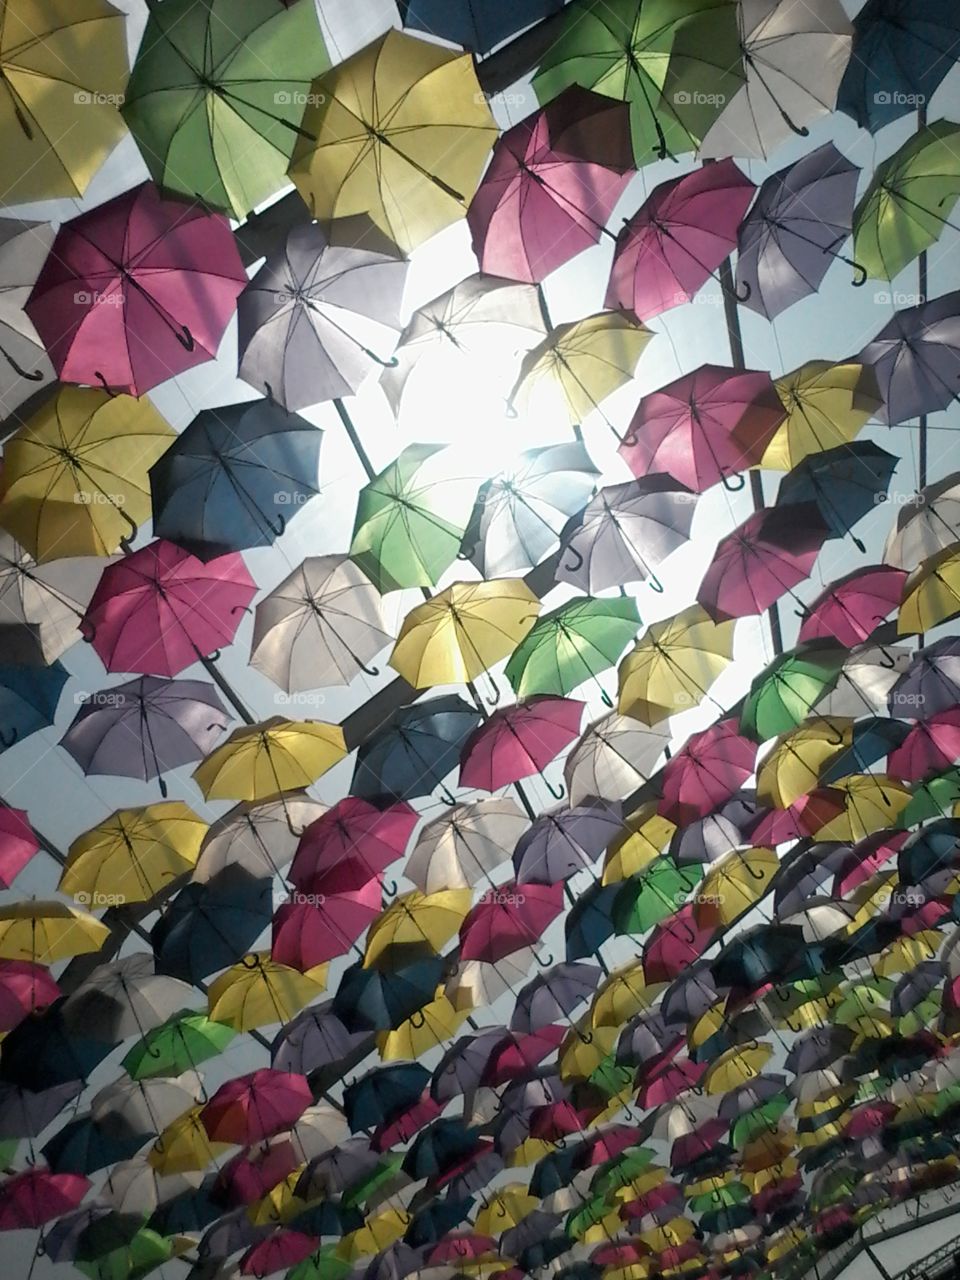 umbrellas. Let's party in this little Town.